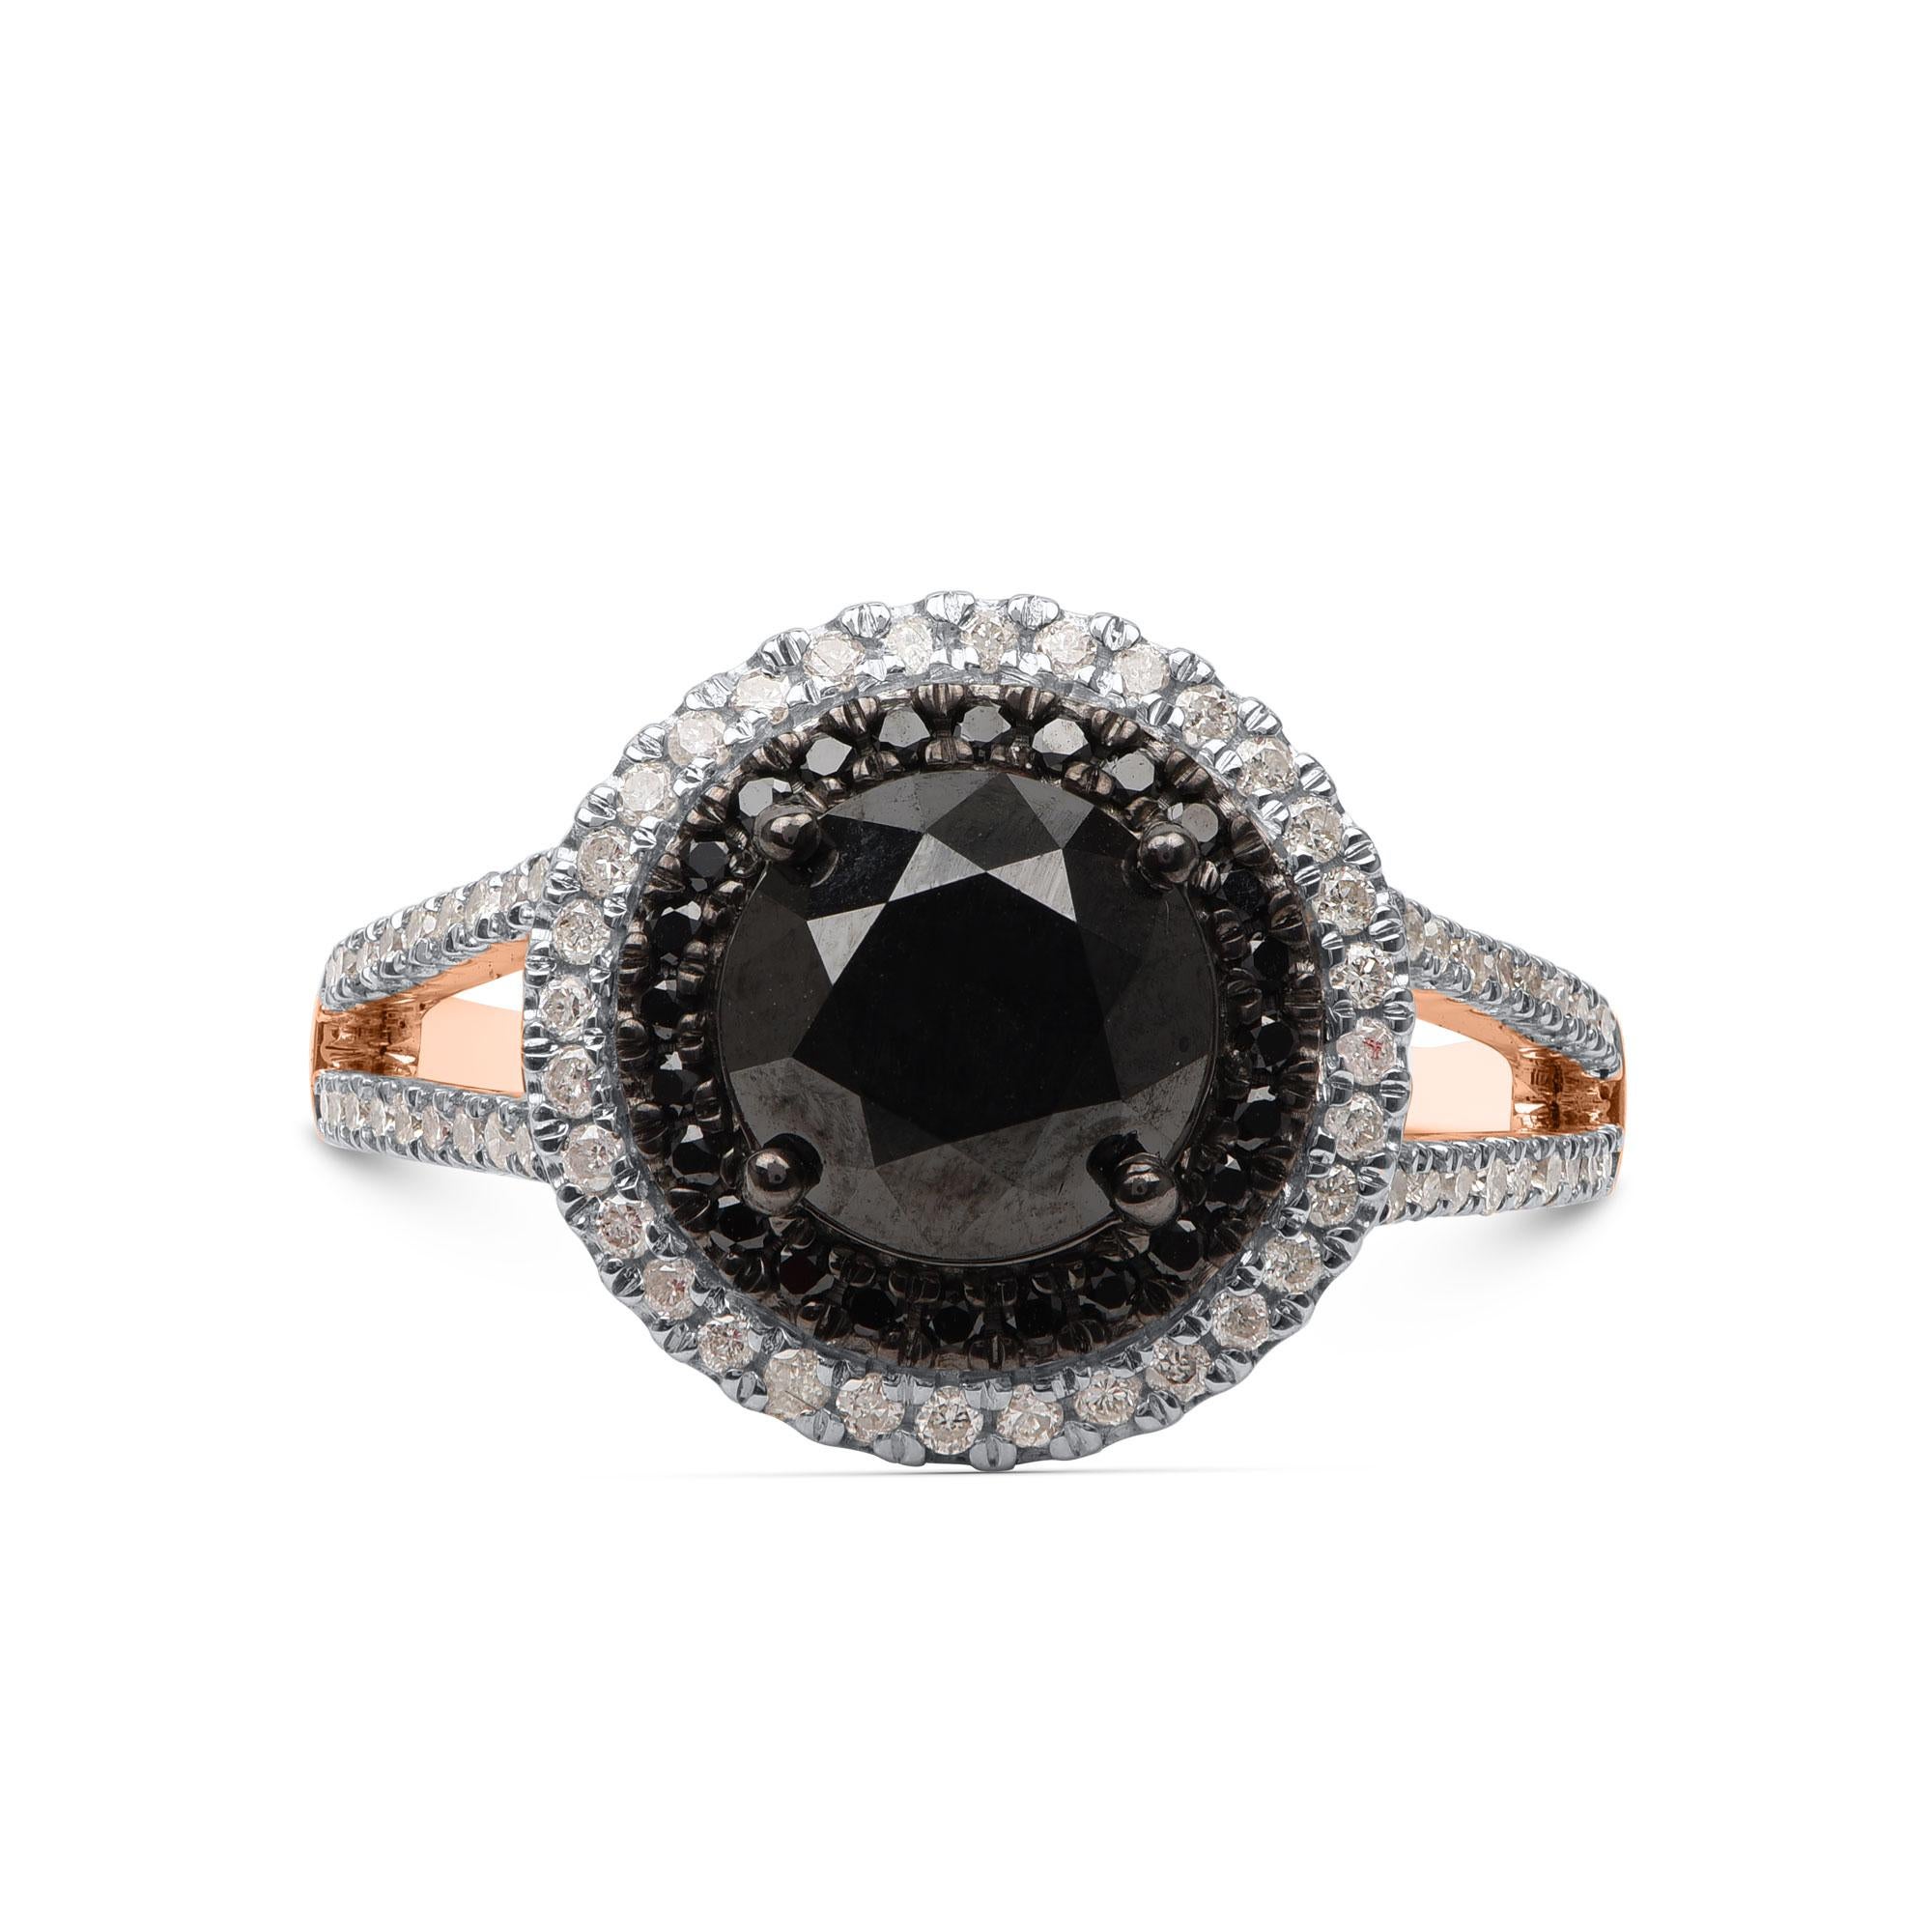 Crafted in 14-karat rose gold and studded with 69 brilliant white and 25 black diamonds in prong setting. A unique choice that looks elegant as well as stunning. 

This style is Made to Order - please allow three weeks for manufacturing. It can be